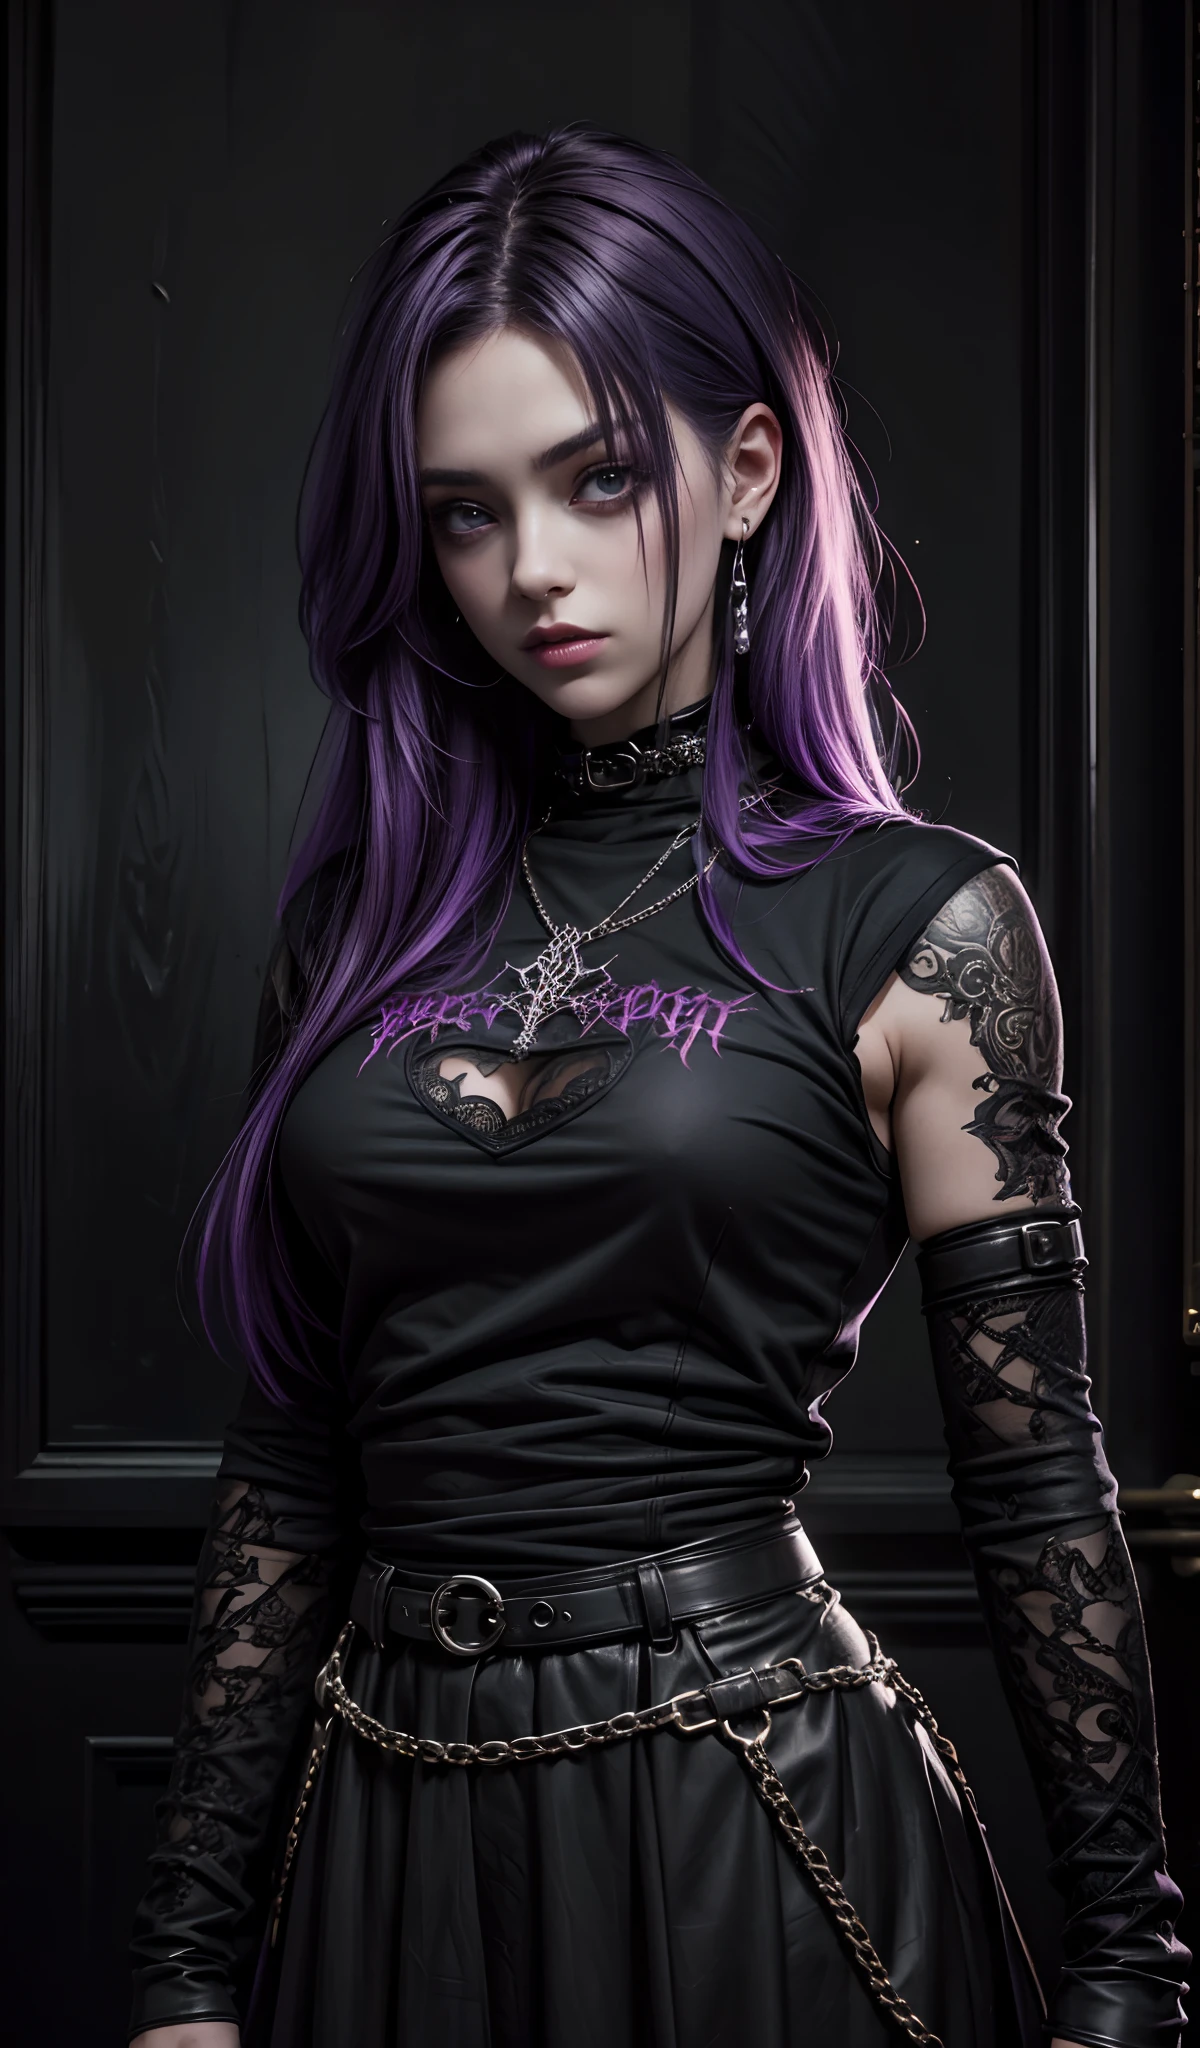 A girl with purple hair wearing a black shirt, gothic art, many details, she is wearing streetwear, ultra realistic image, dark hair, beautiful appearance, gothic girl